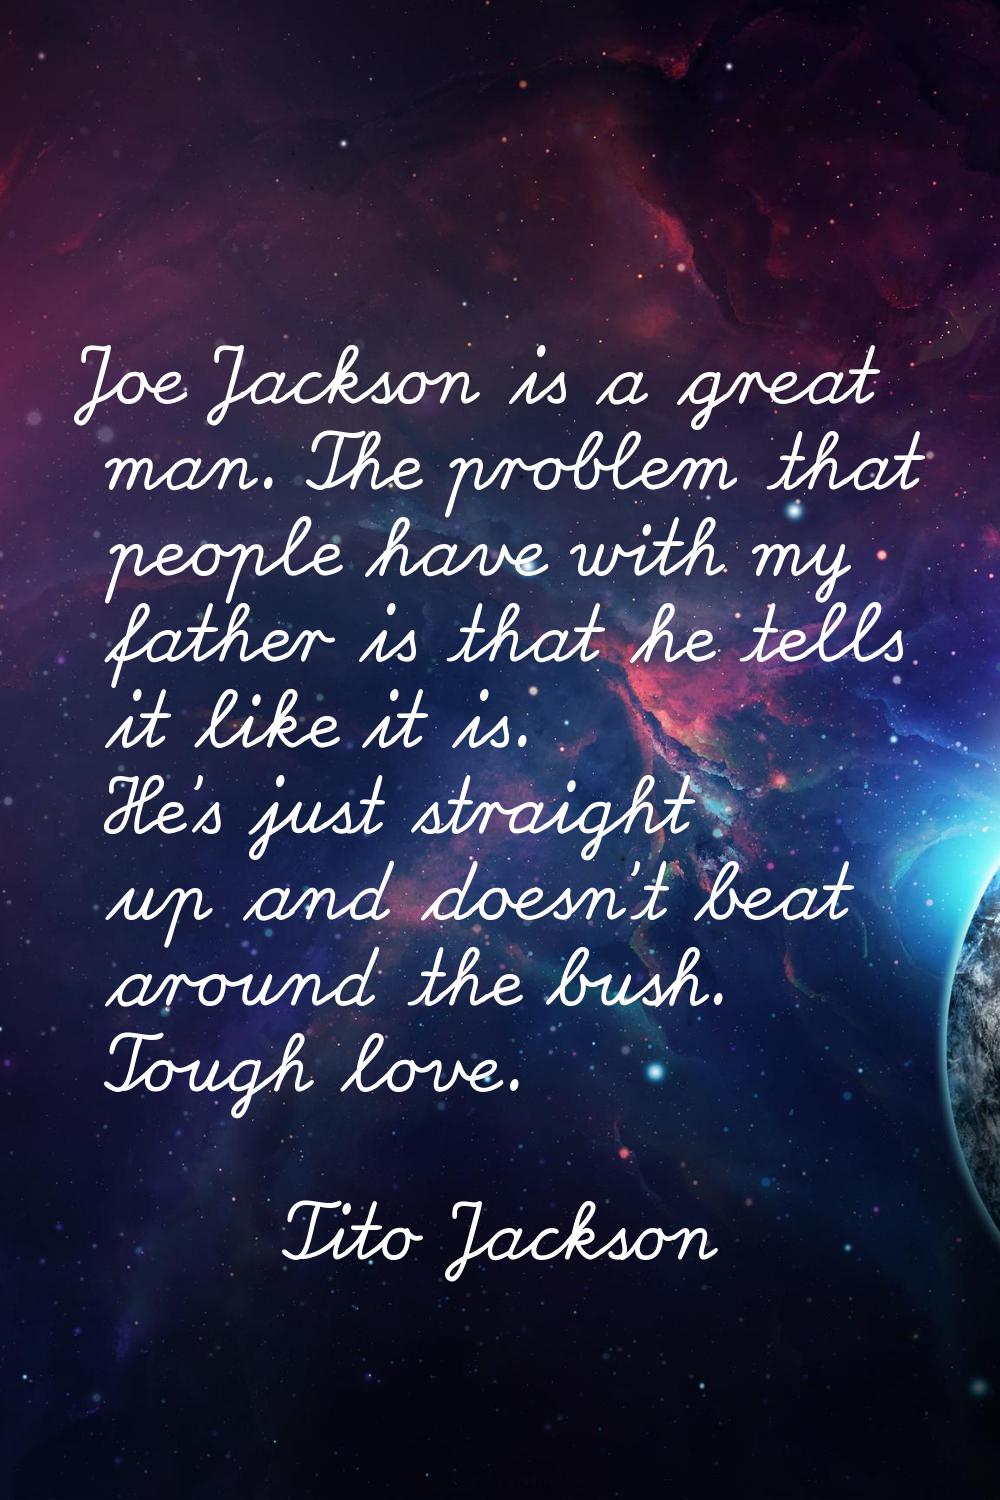 Joe Jackson is a great man. The problem that people have with my father is that he tells it like it